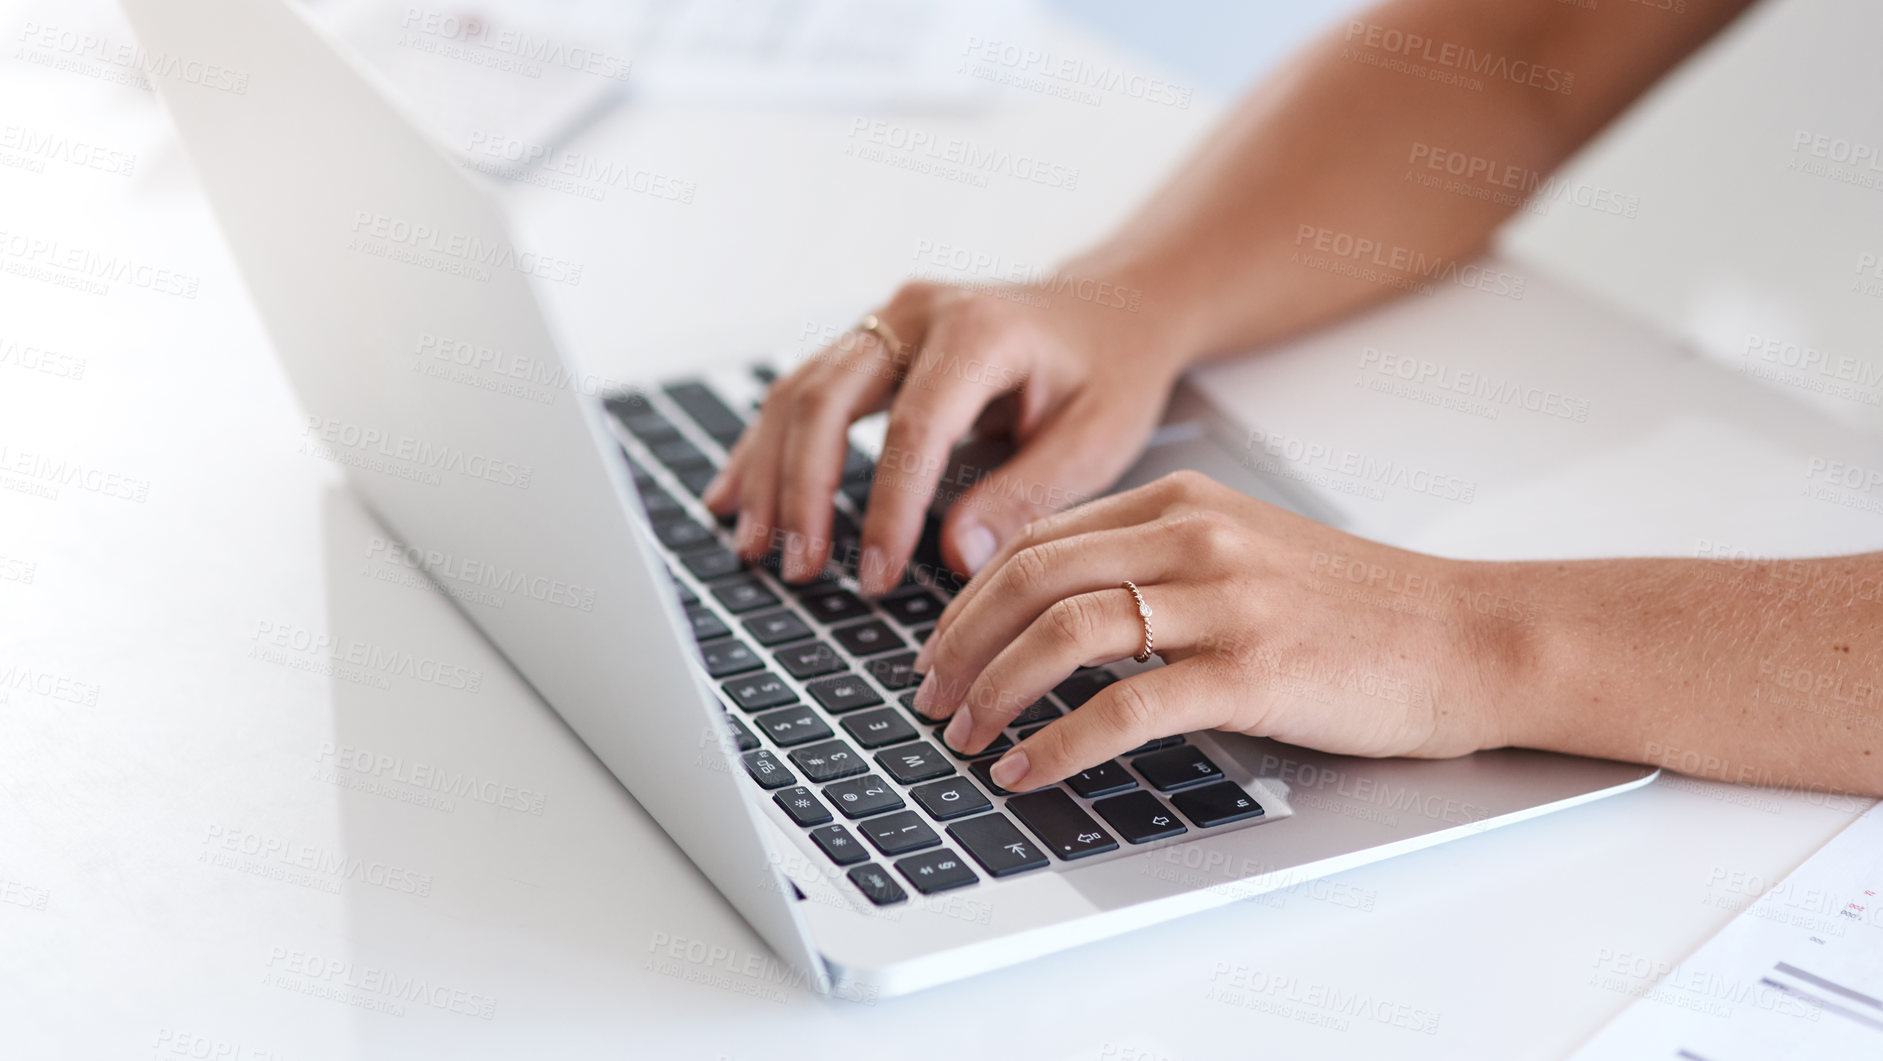 Buy stock photo Closeup shot fo an unrecognisable businesswoman using a laptop in an office